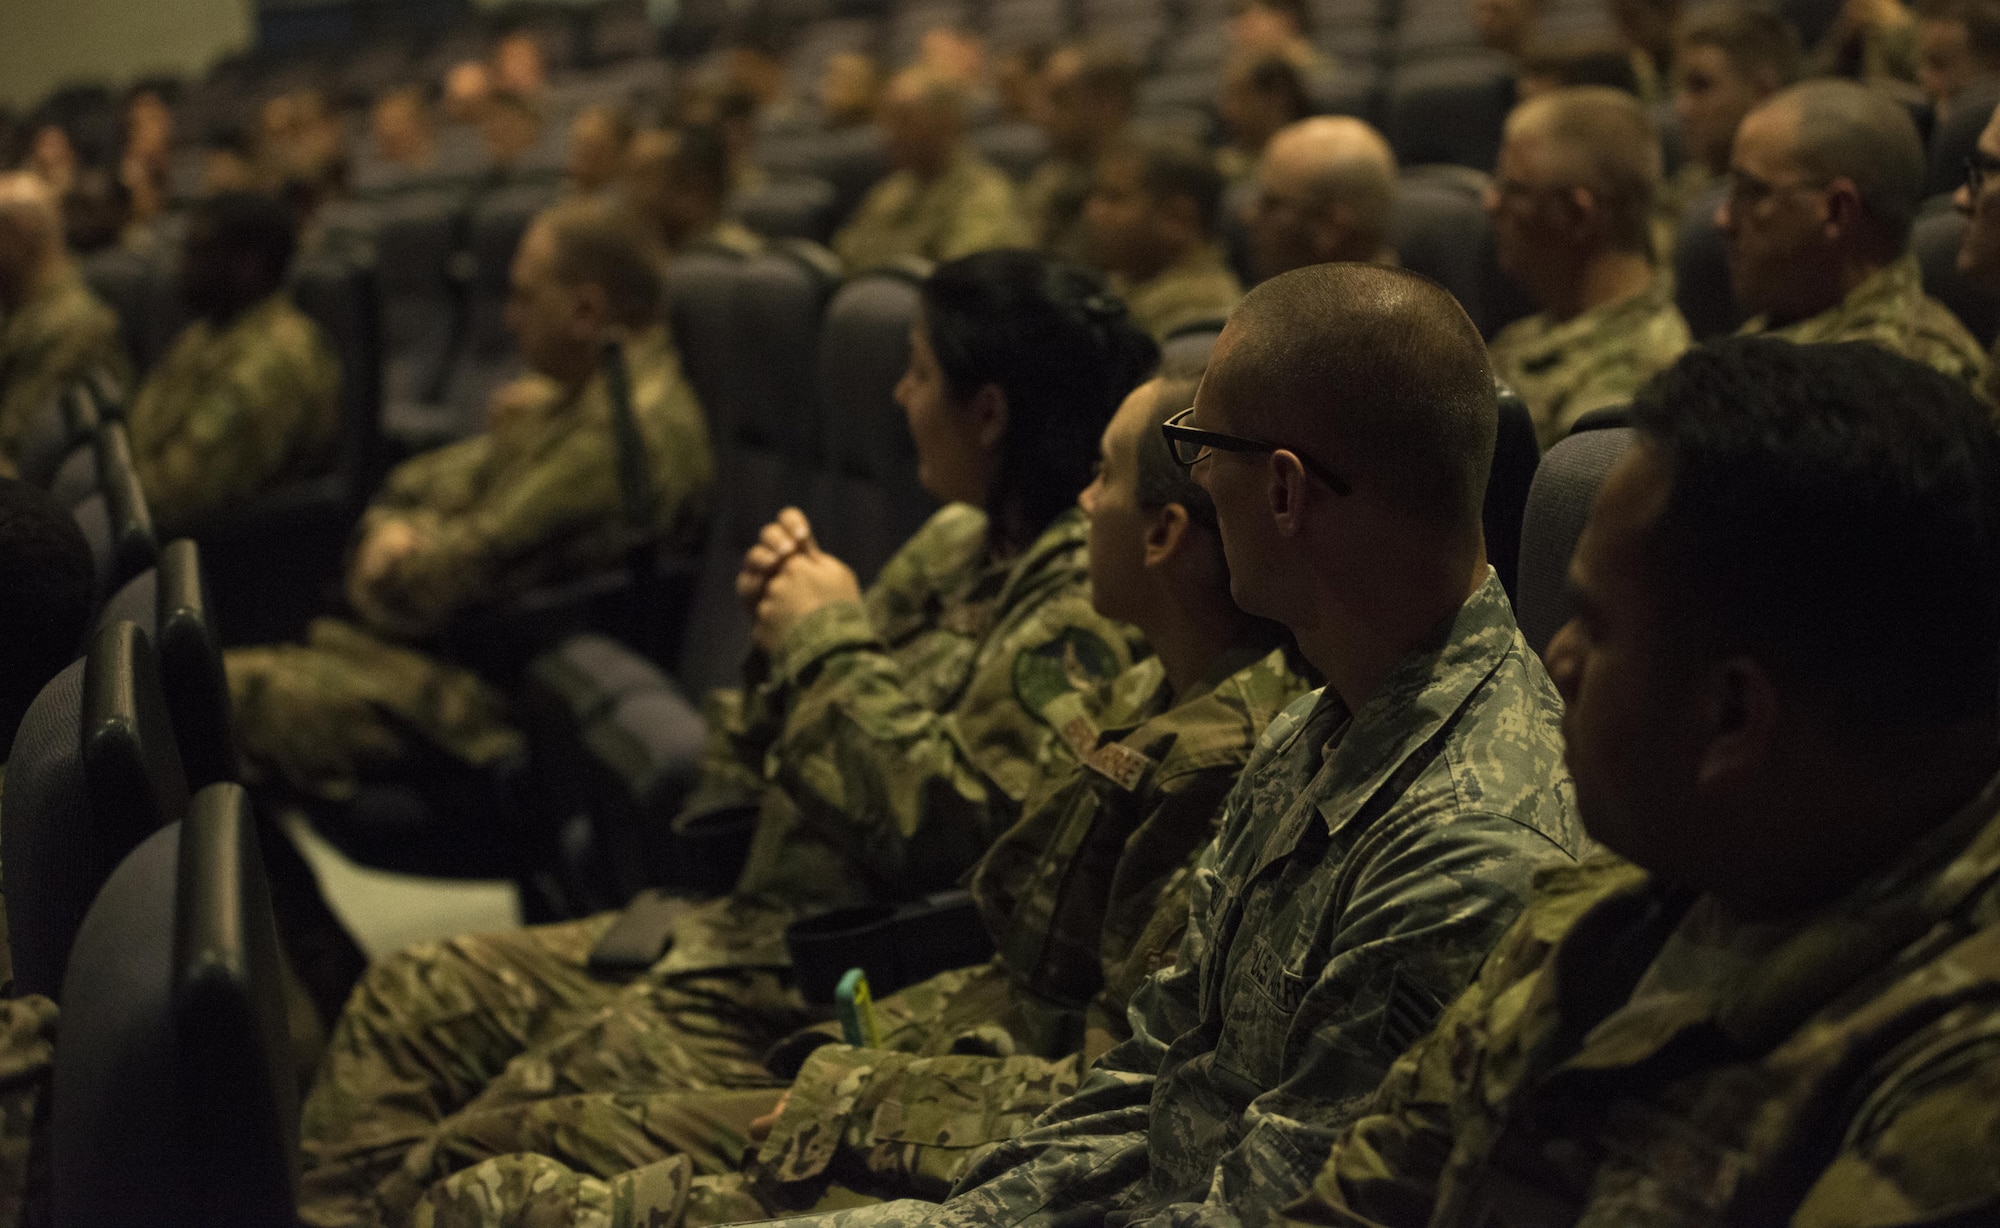 Enlisted members of the 353rd Special Operations Group listen to Air Force Special Operations Command Chief Master Sgt. Gregory Smith during an all-call June 19, 2017 at Kadena Air Base, Okinawa, Japan. Smith described the significance of these changes, provided resources and emphasized the choices Airmen need to make. (U.S. Air Force photo by Capt. Jessica Tait)